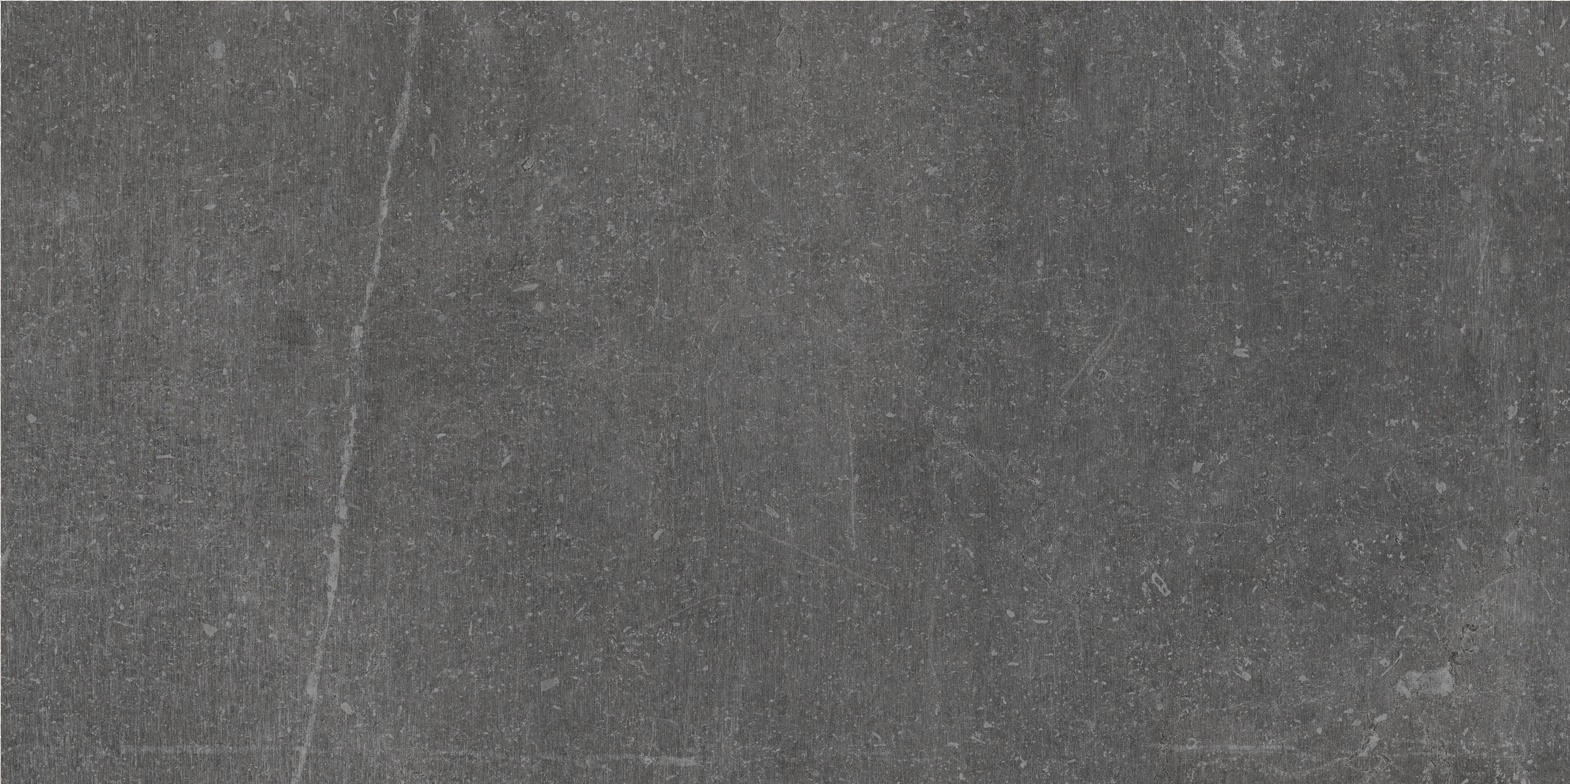 graphite pattern glazed porcelain field tile from nexus anatolia collection distributed by surface group international matte finish pressed edge 12x24 rectangle shape